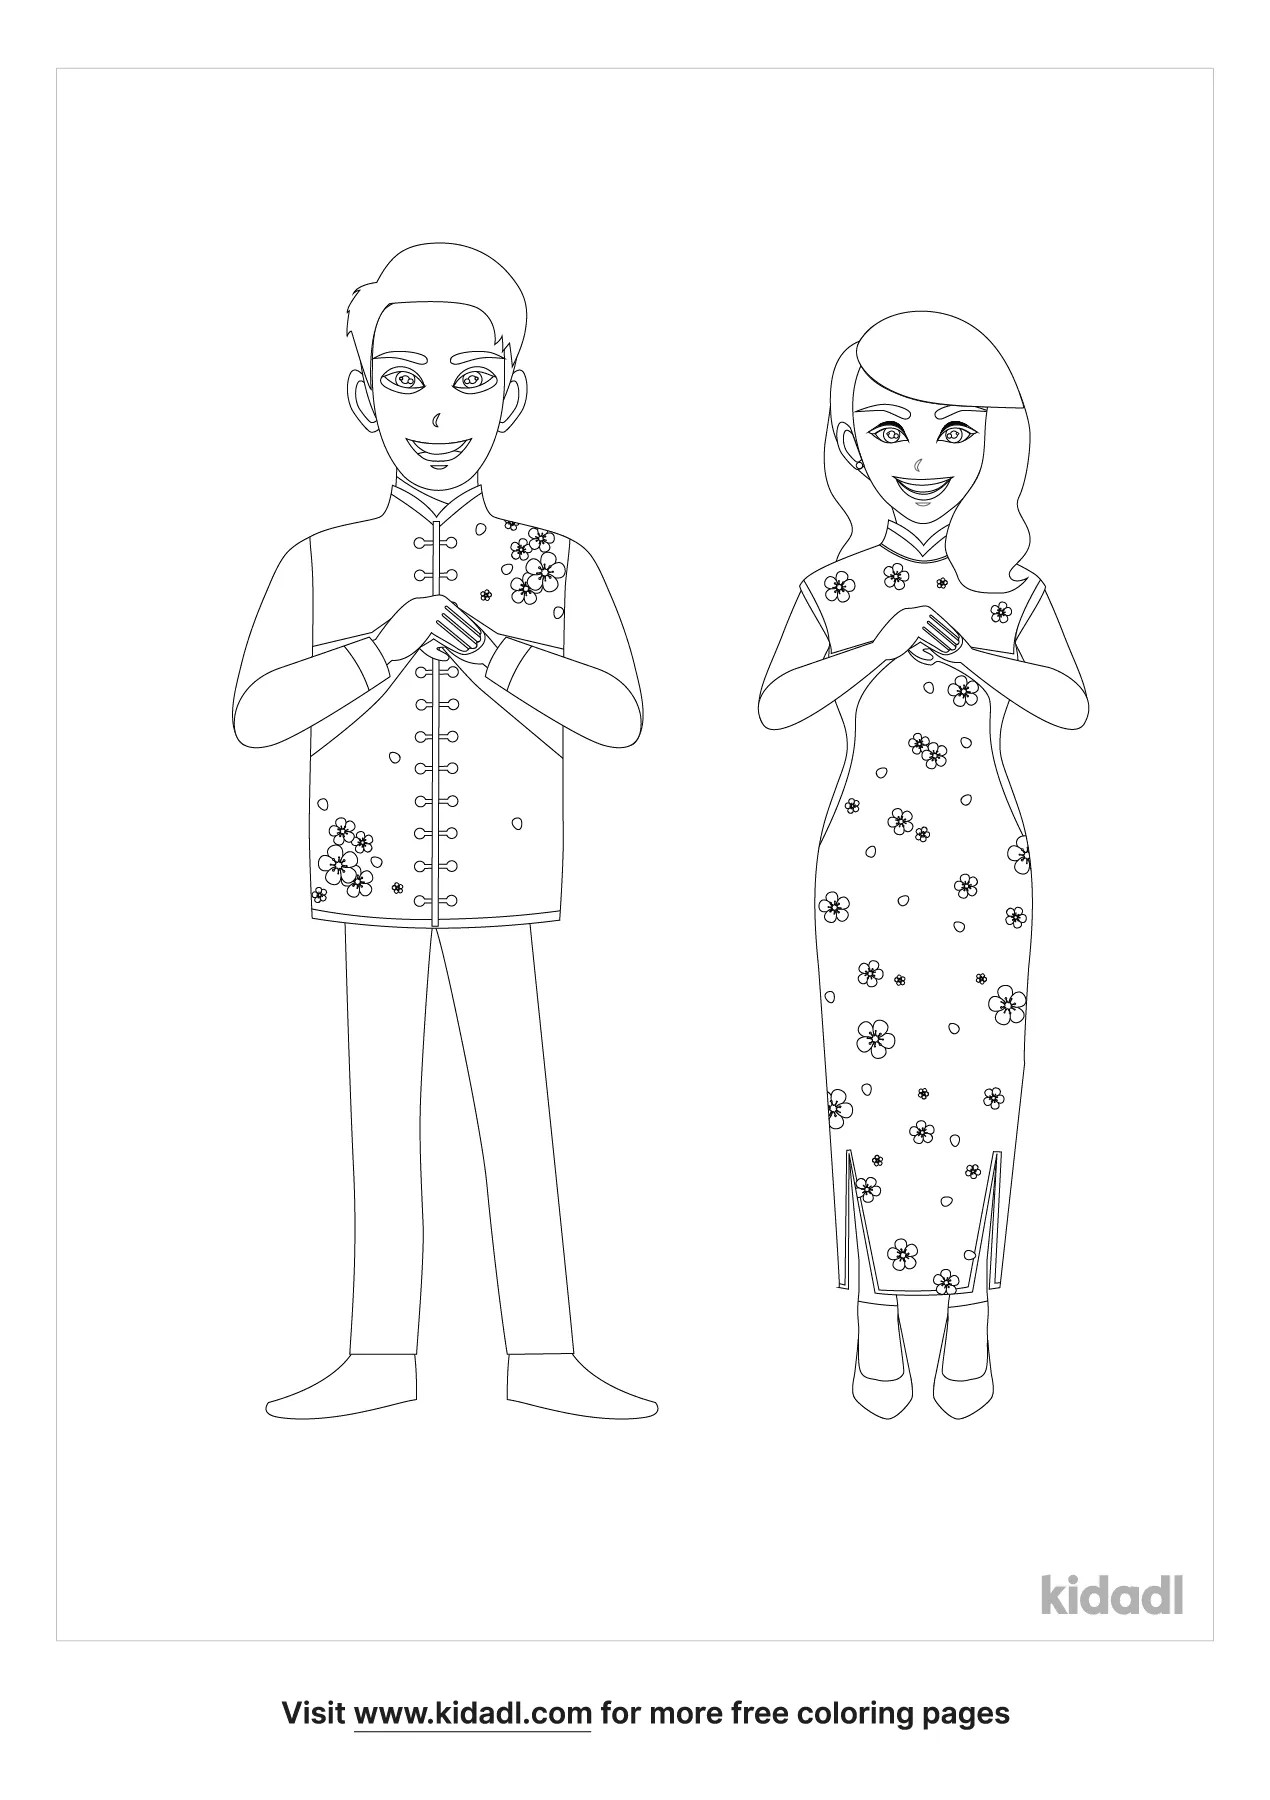 Free Cheongsam Coloring Page | Coloring Page Printables | Kidadl